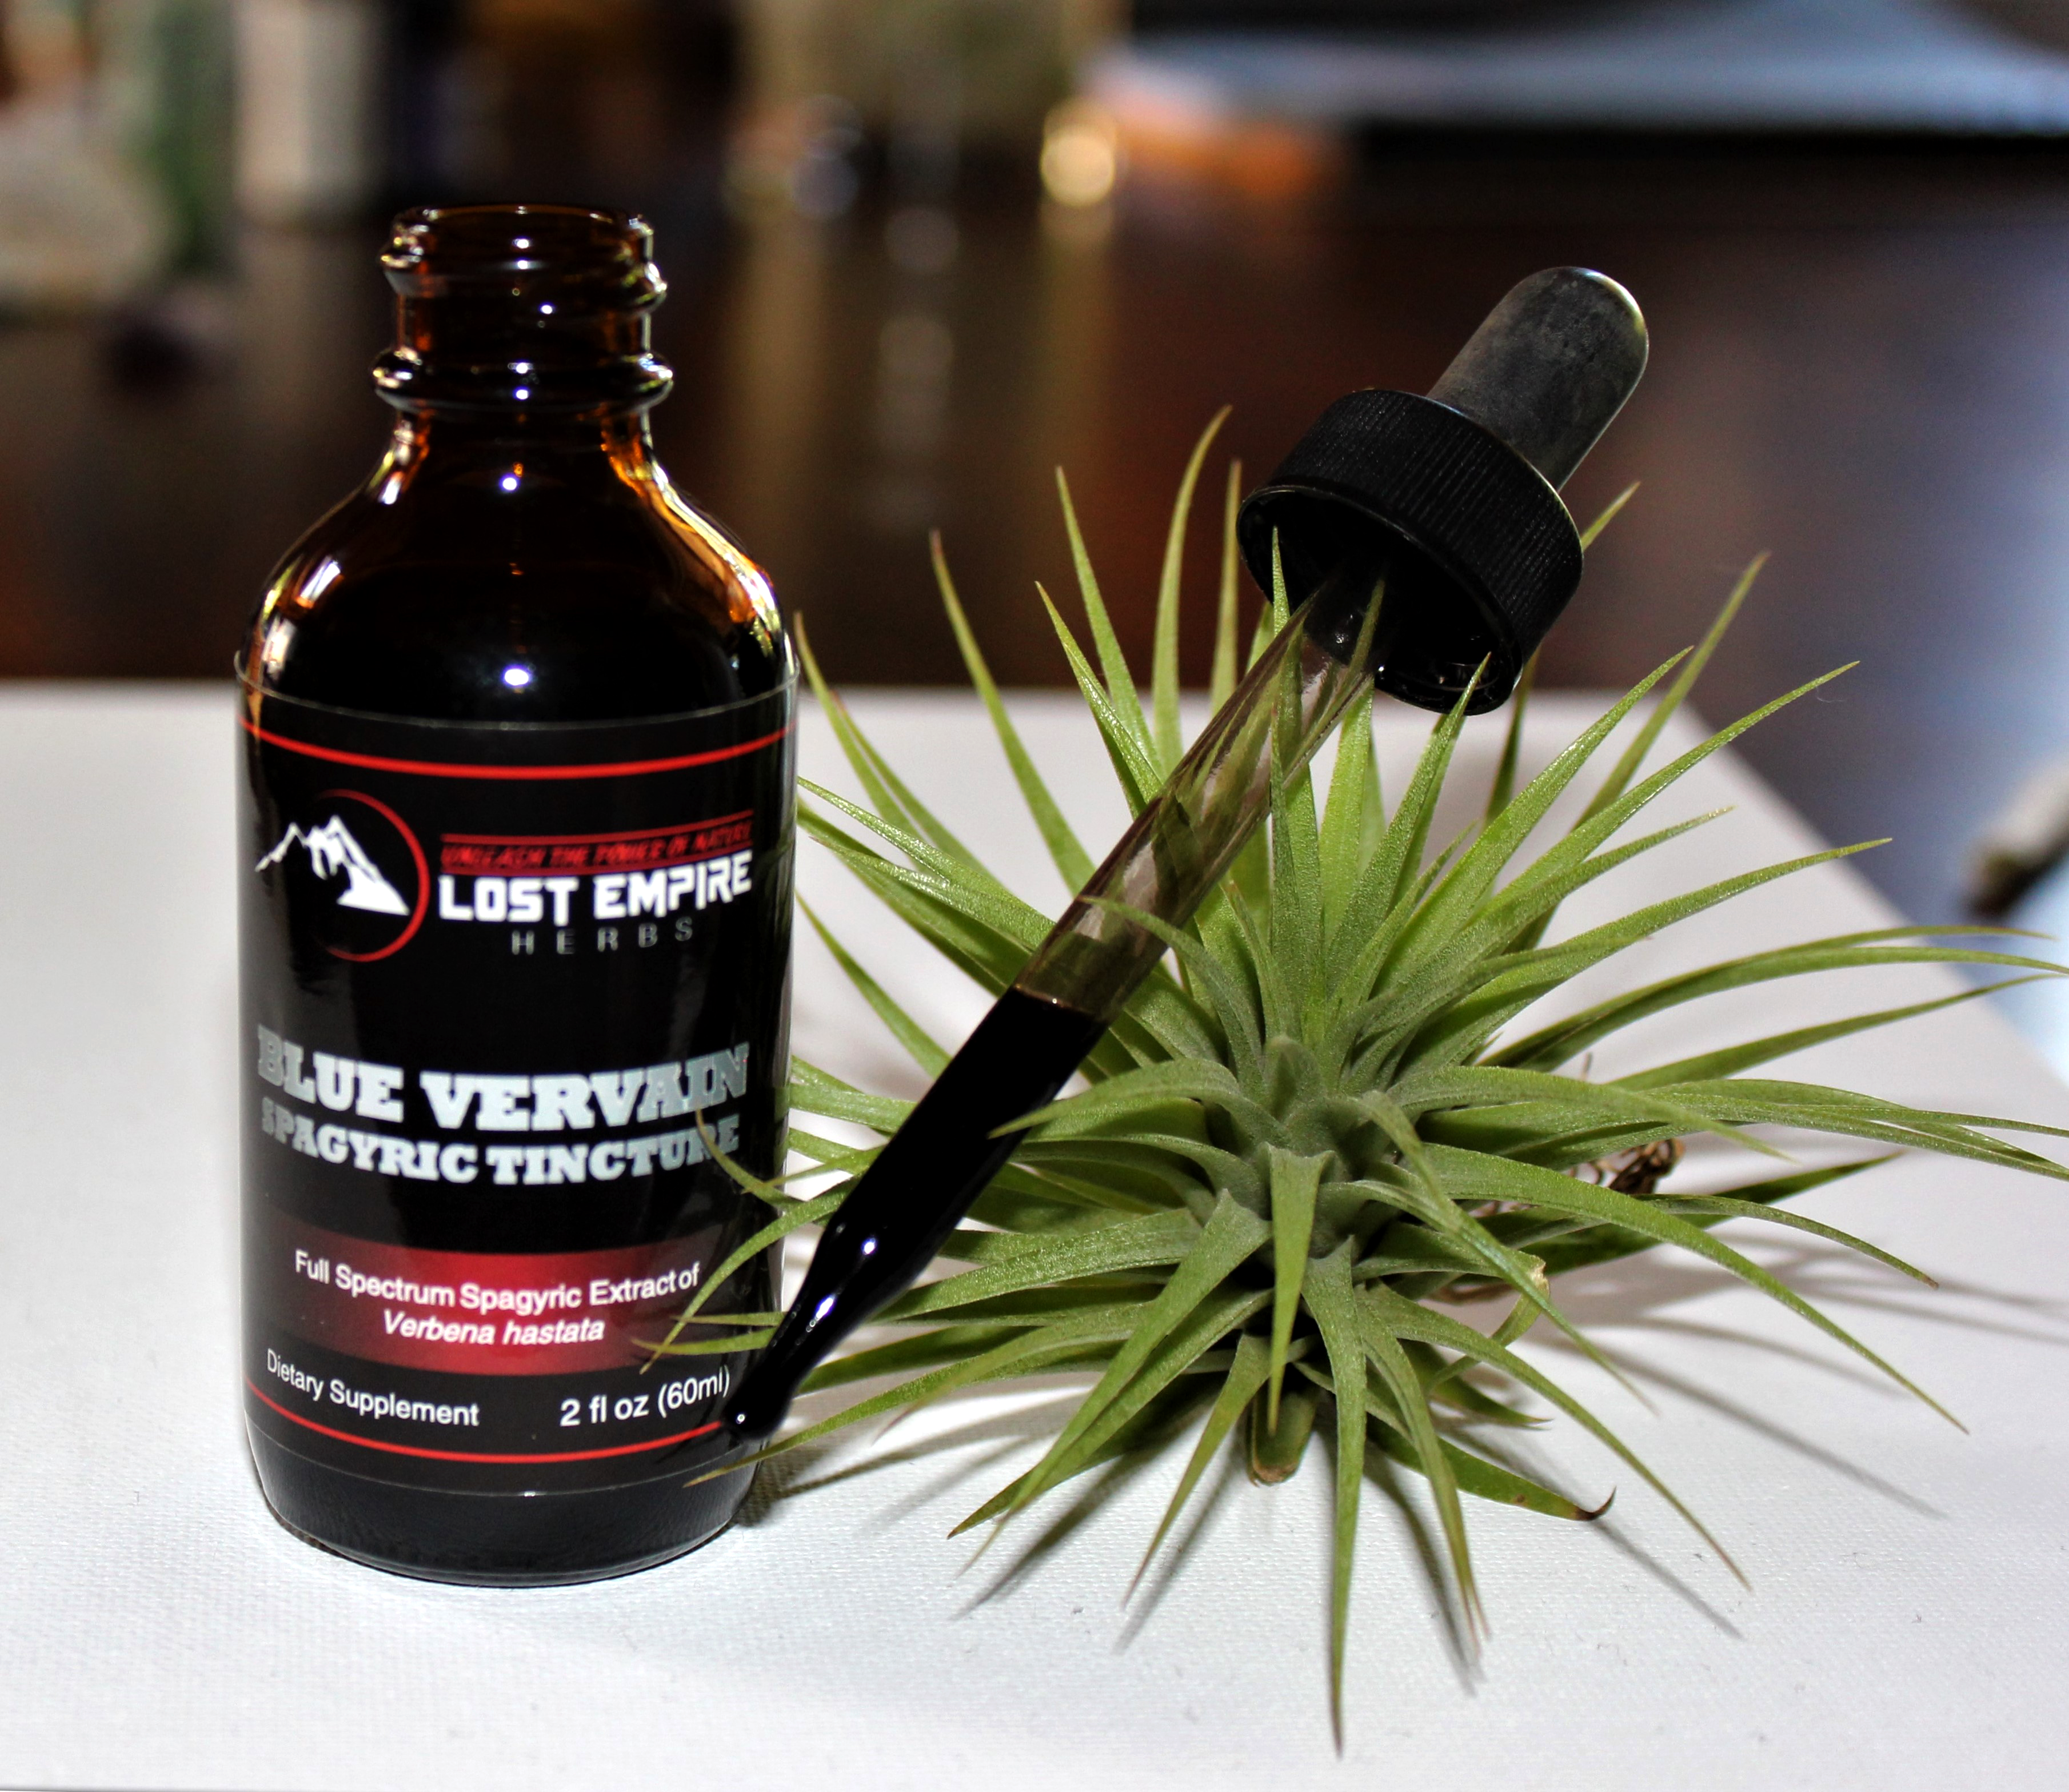 Blue Vervain natural herb tincture